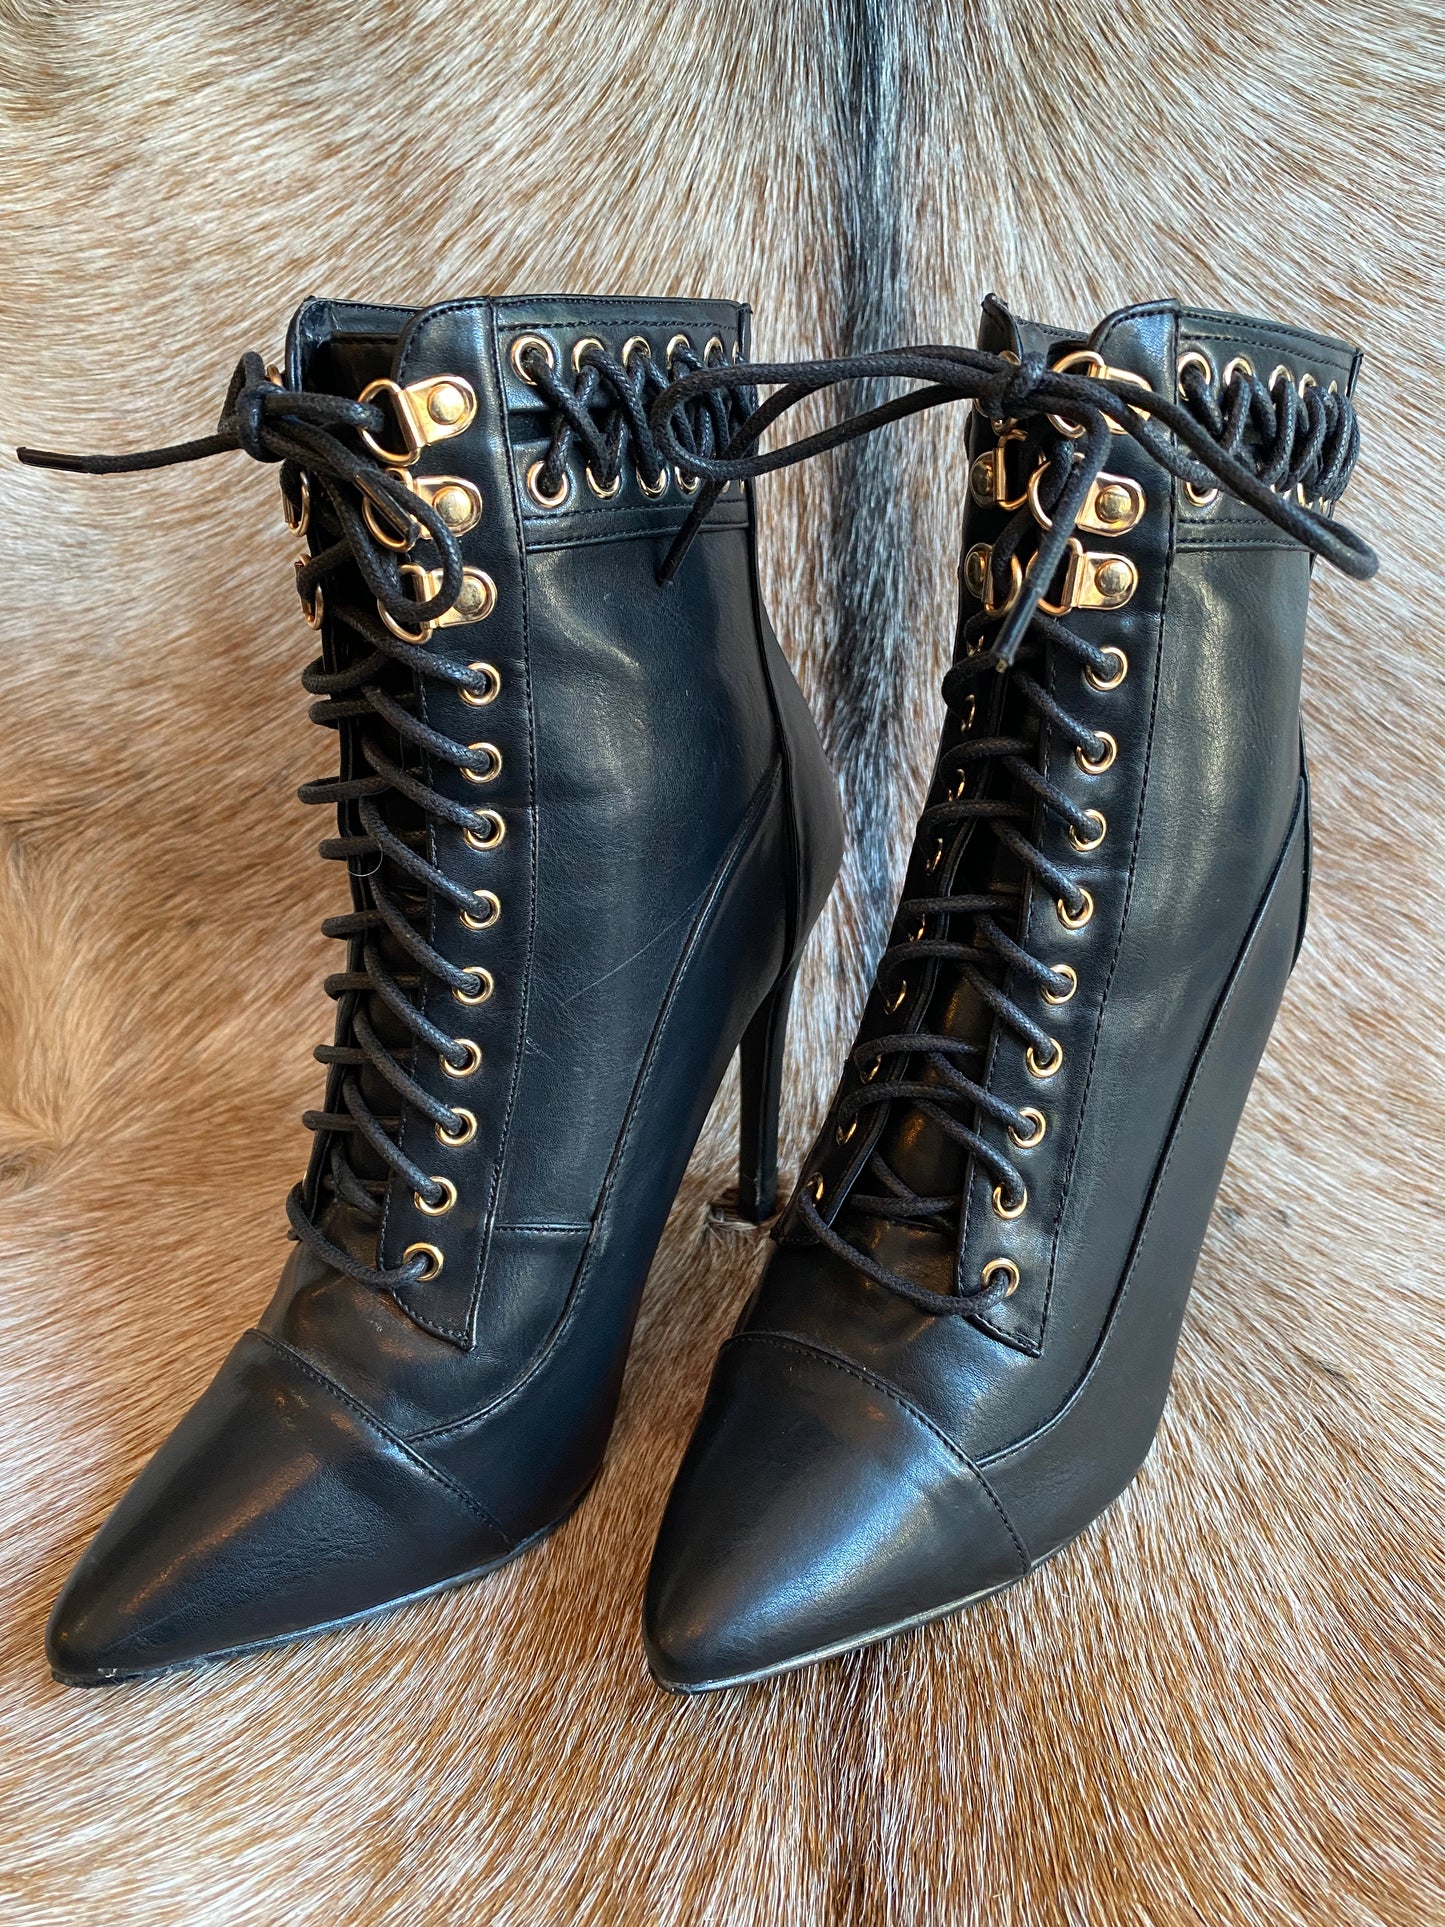 Black Faux Leather Lace Up Witchy High Heels